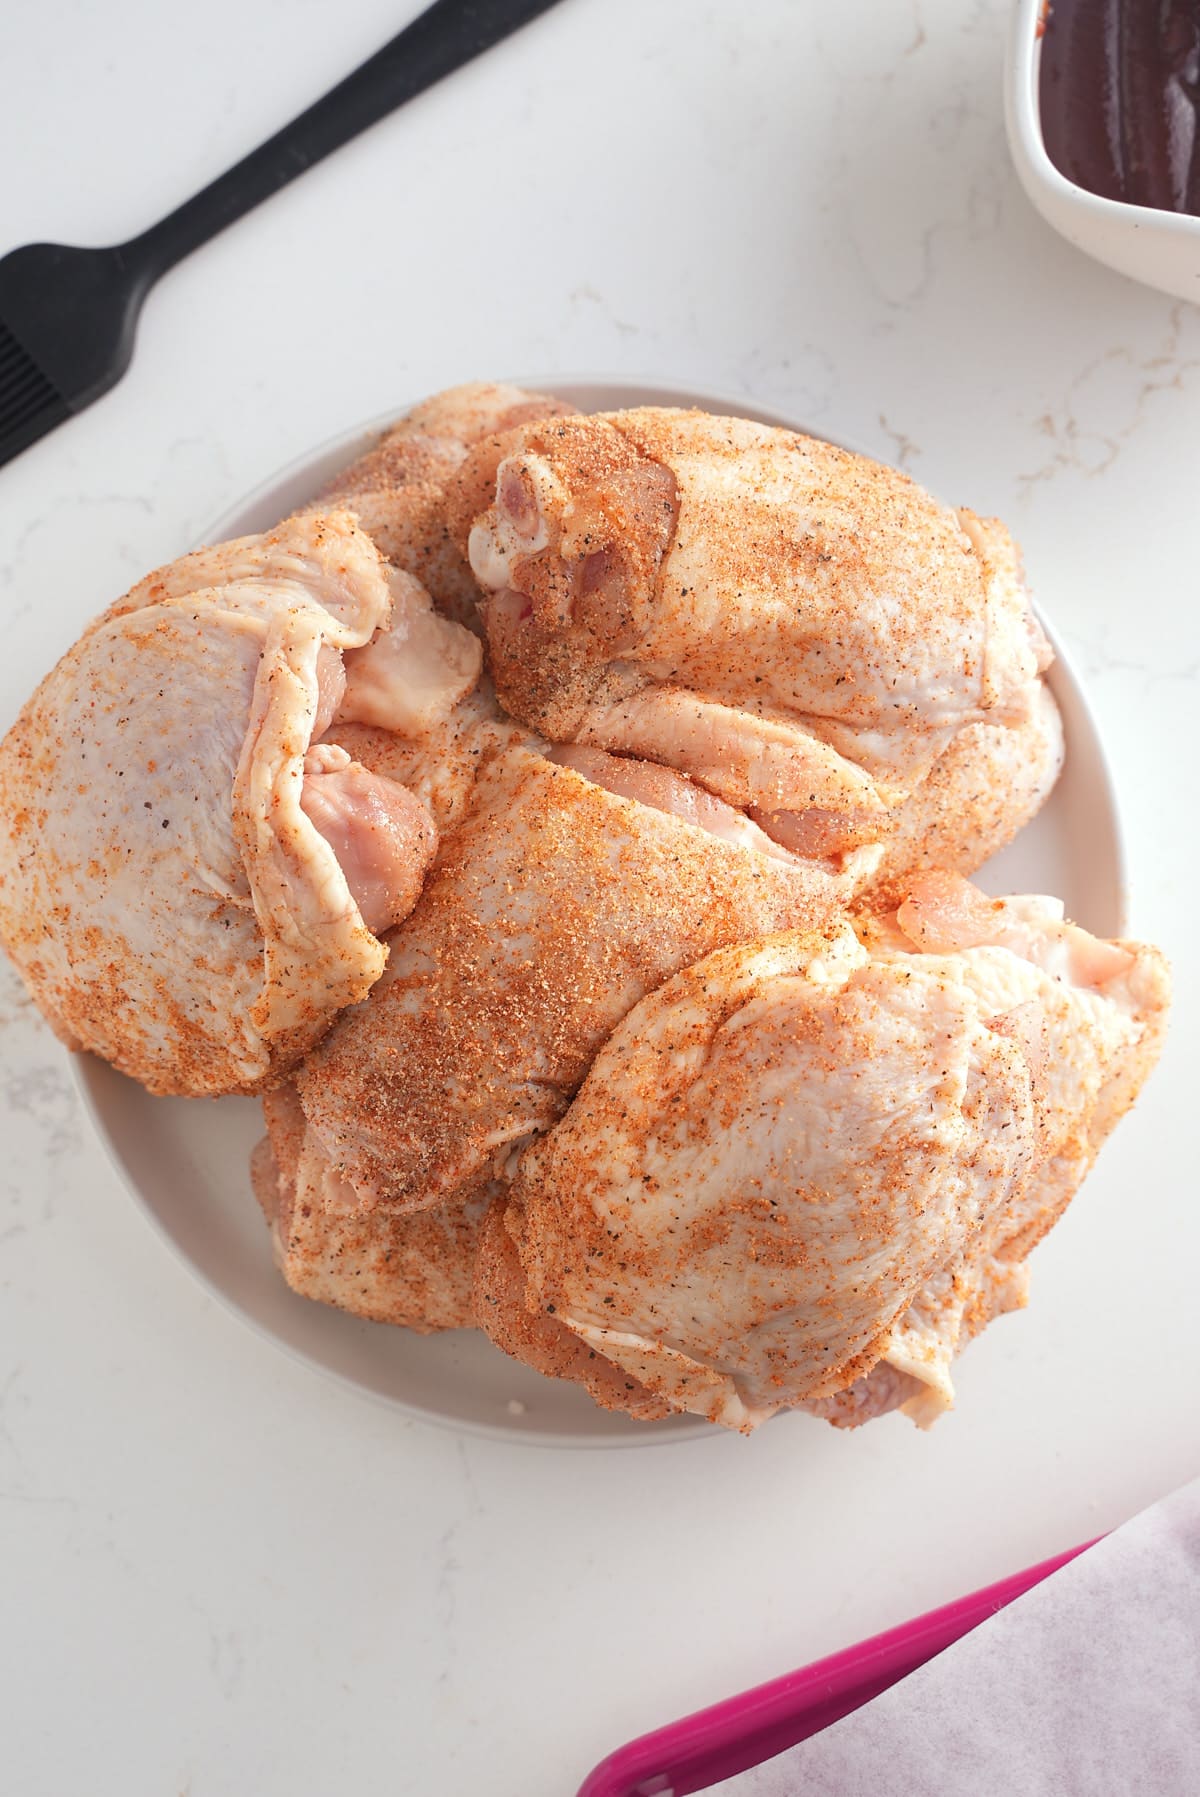 Seasoned chicken thighs on a plate.